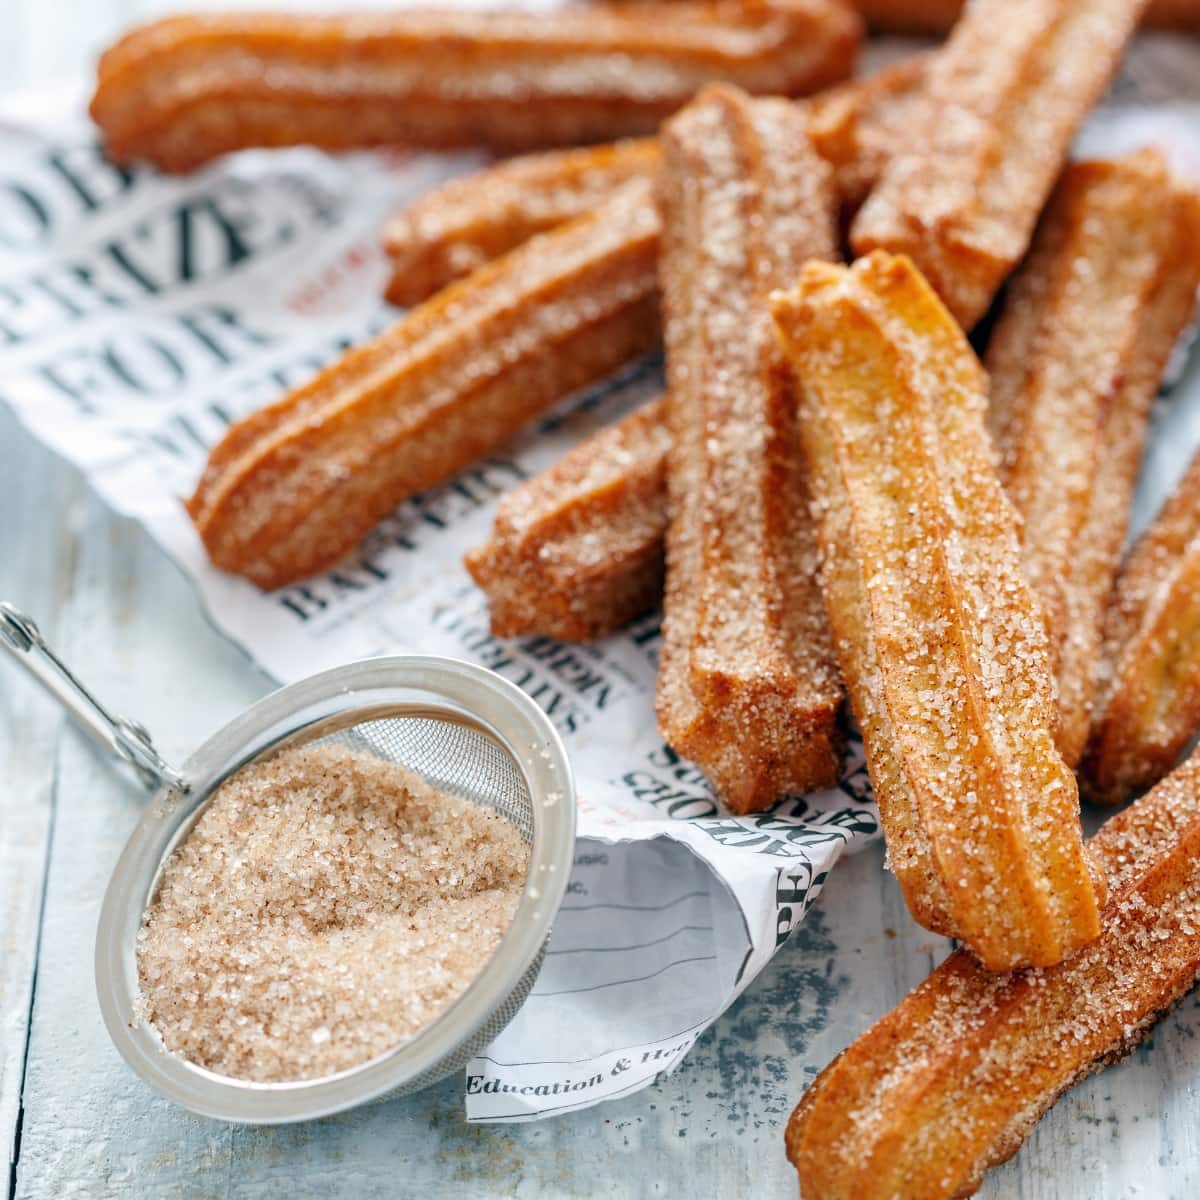 Homemade Churros Dusted With Homemade Cinnamon Sugar on a Newspaper with Cinnamon Sugar in a Dusting Sieve Beside It